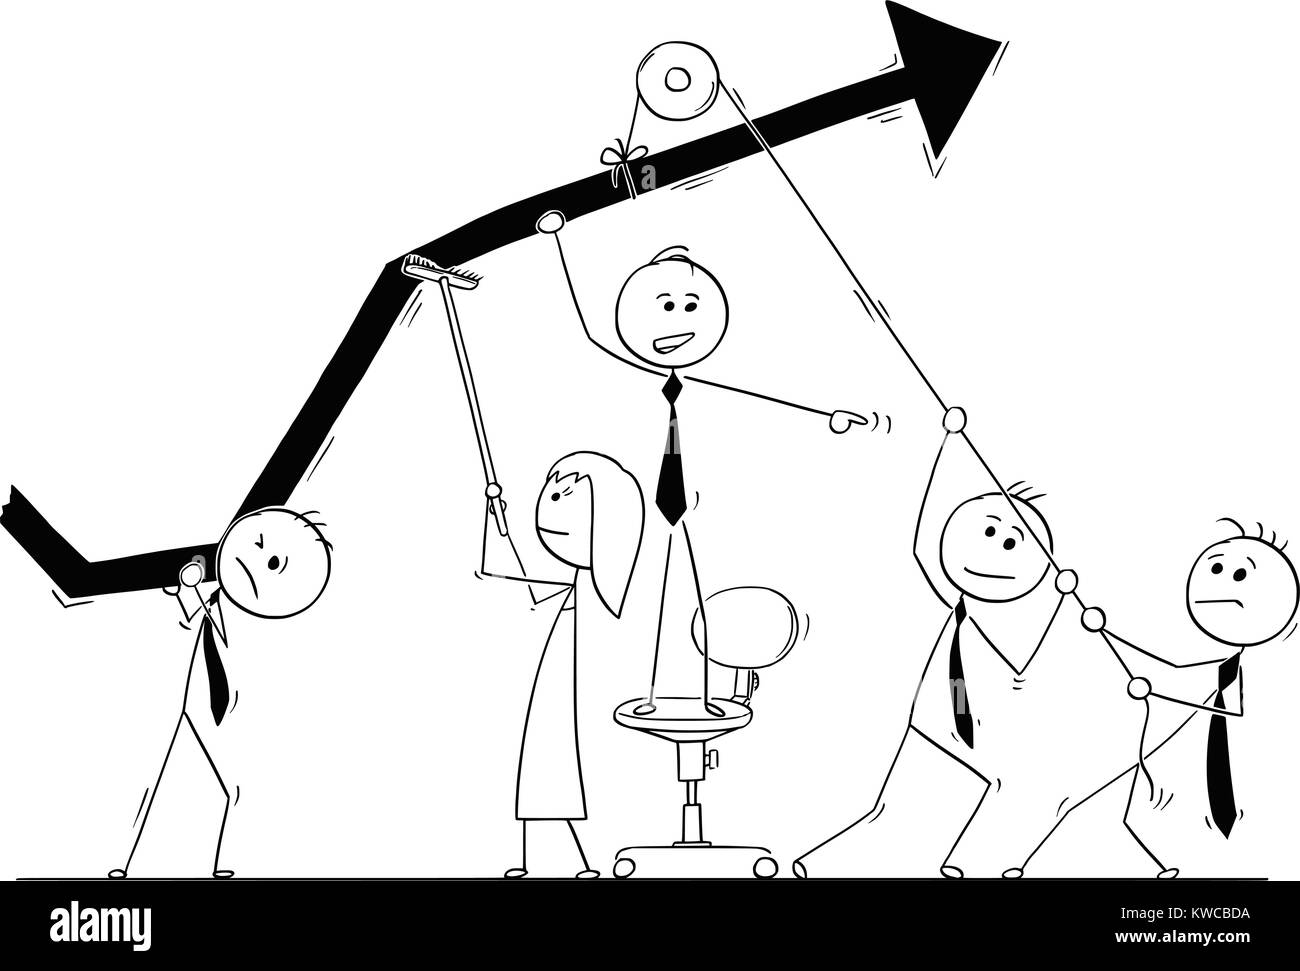 Cartoon stick man drawing conceptual illustration of group of business people working together as team on growth chart to achieve success and profit.  Stock Vector